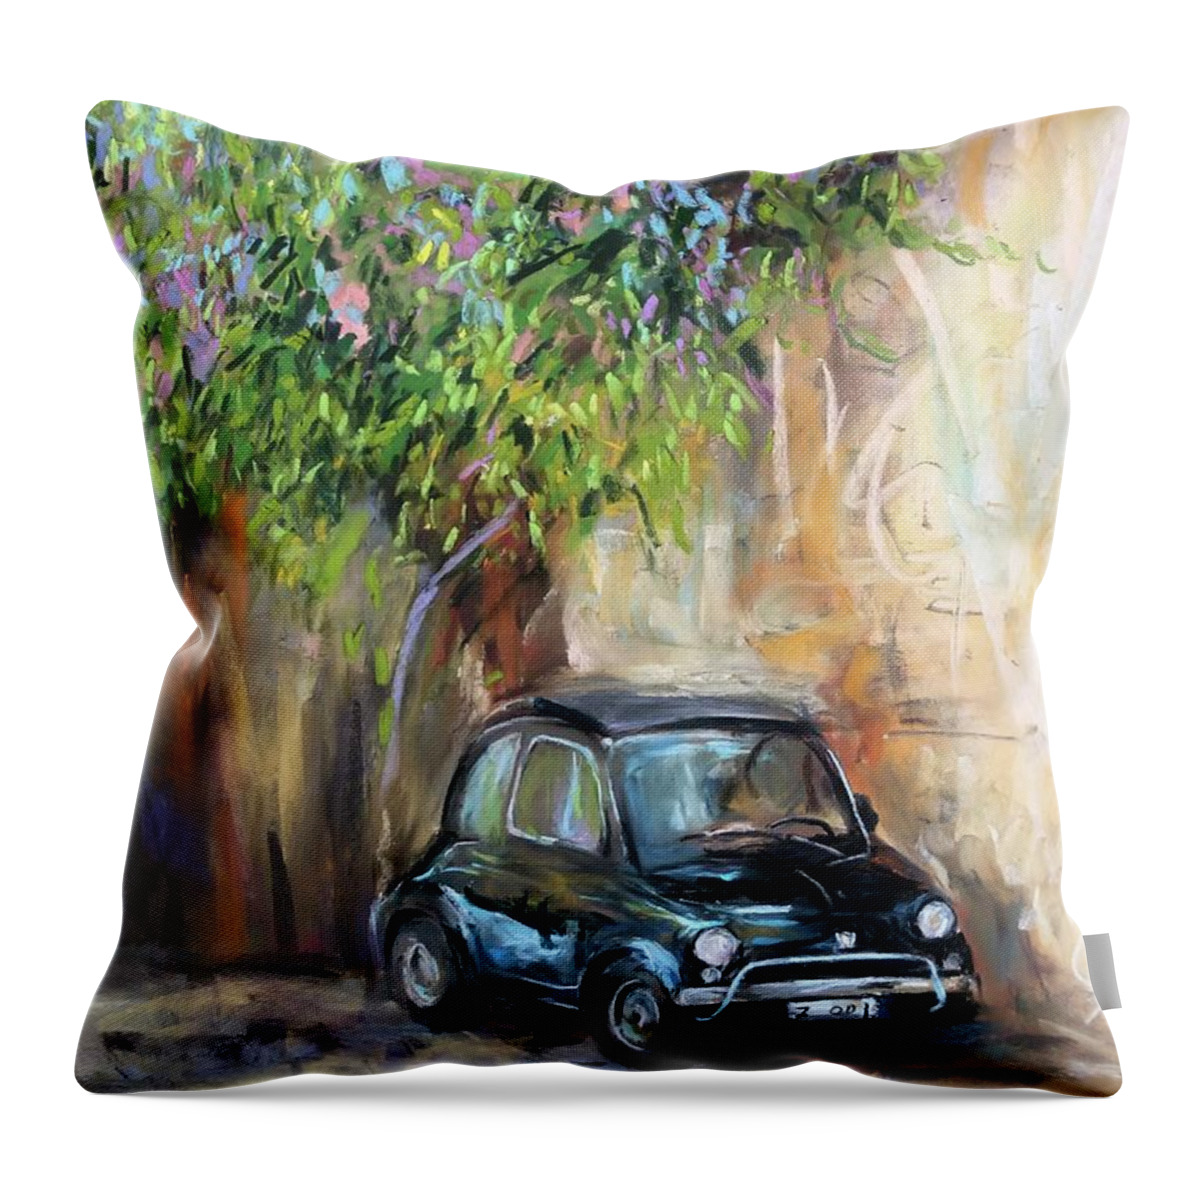 Follow Your Heart Throw Pillow featuring the painting Follow your heart by Jieming Wang